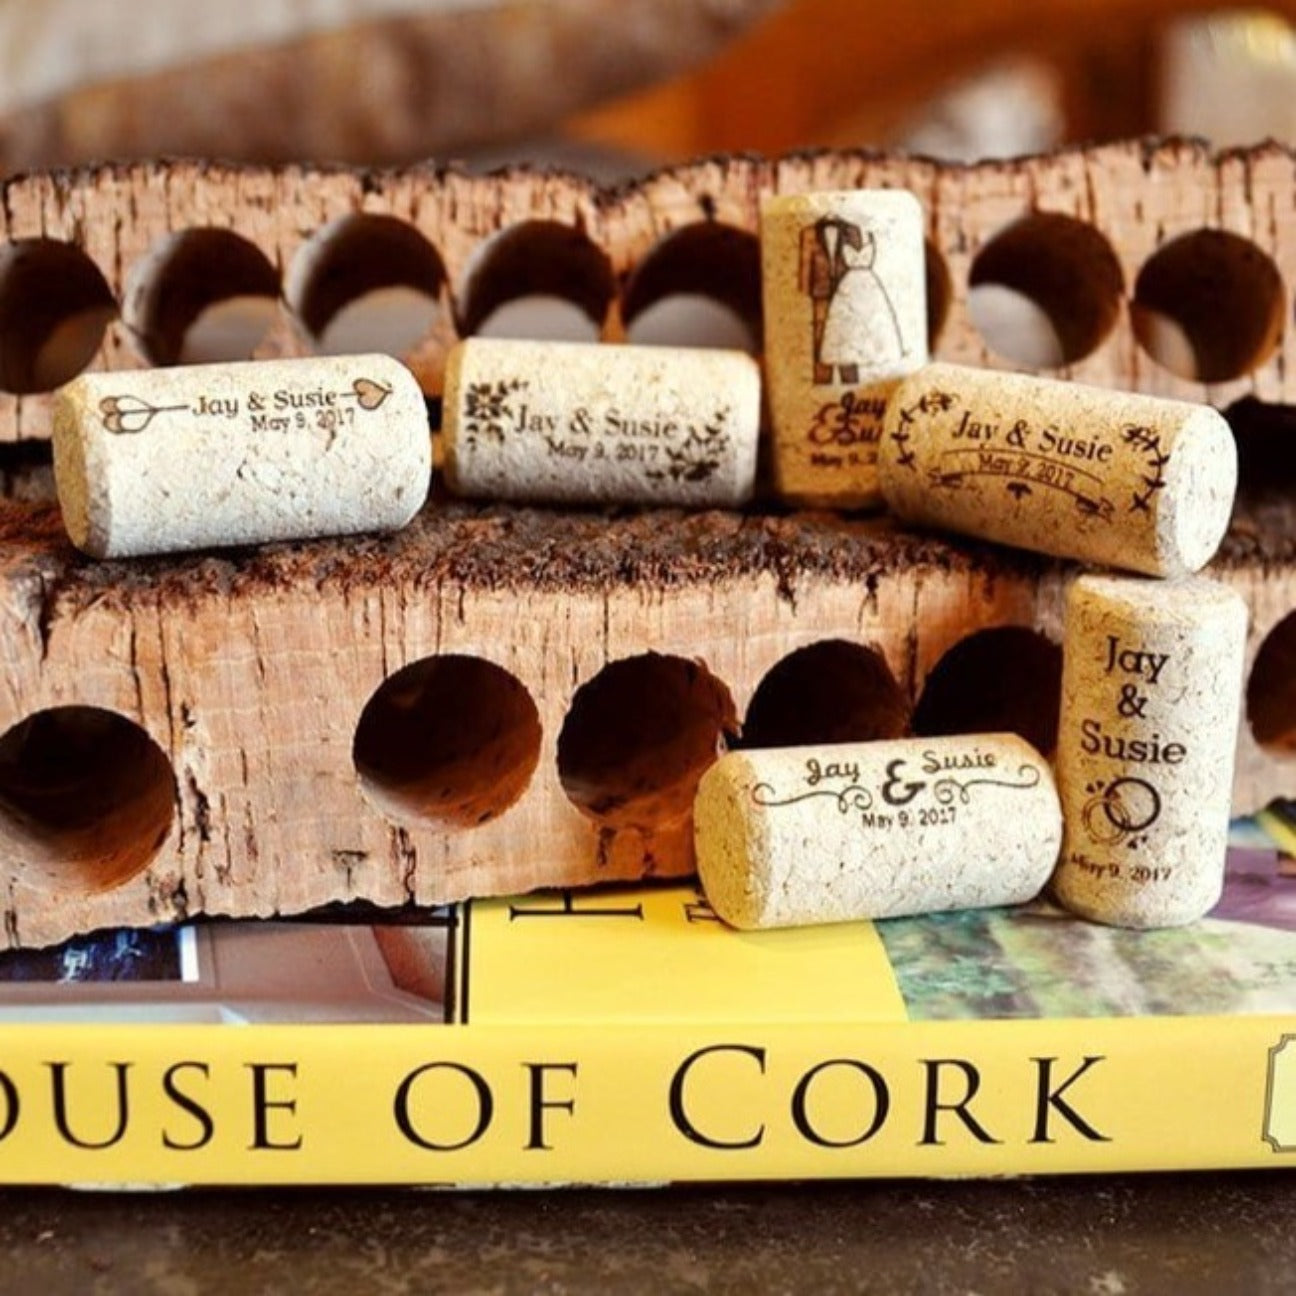 Six custom printed wine corks on a house of cork book with two cork bark punches in the background. Top left wine cork says "Jay & Susie May 7th 2017 with a cupid arrow. The wine cork second from the top left says "Jay and Susie May 7th 2017 with floral corner borders. The wine cork second from the right on the top row shows a man and woman wedding topper and says 